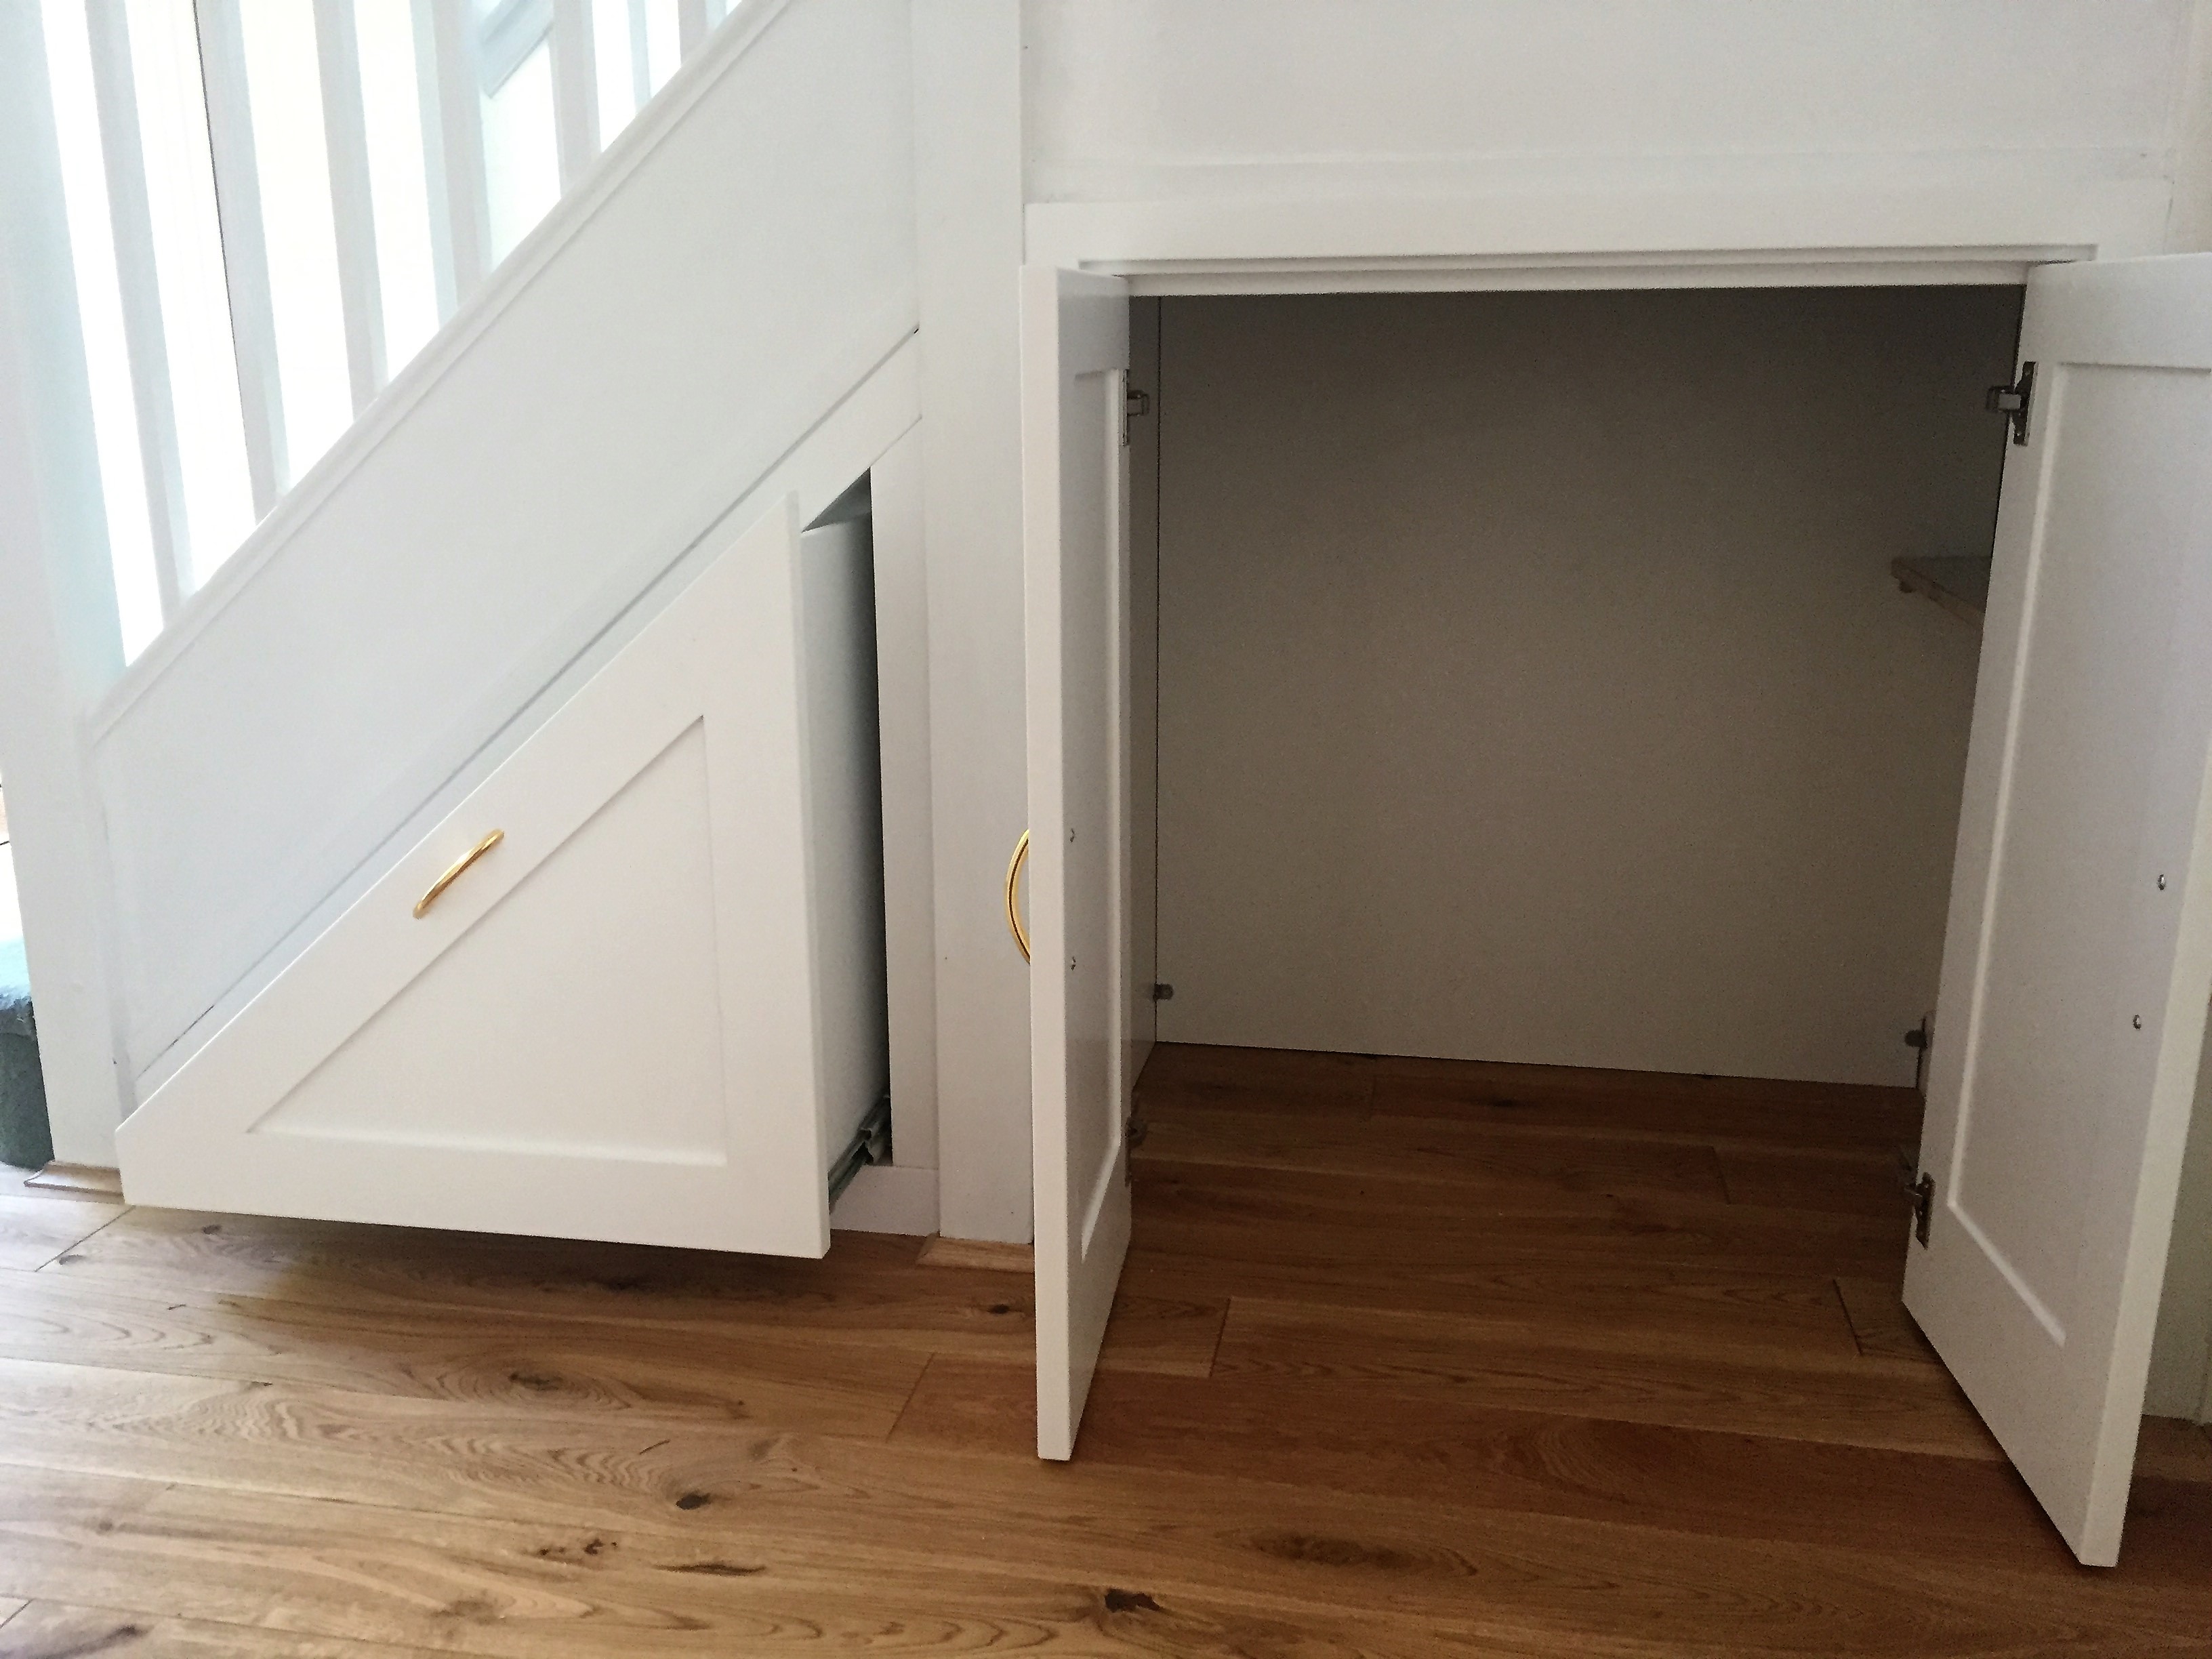 Under-Stair Storage Cabinet, Woodworking Project